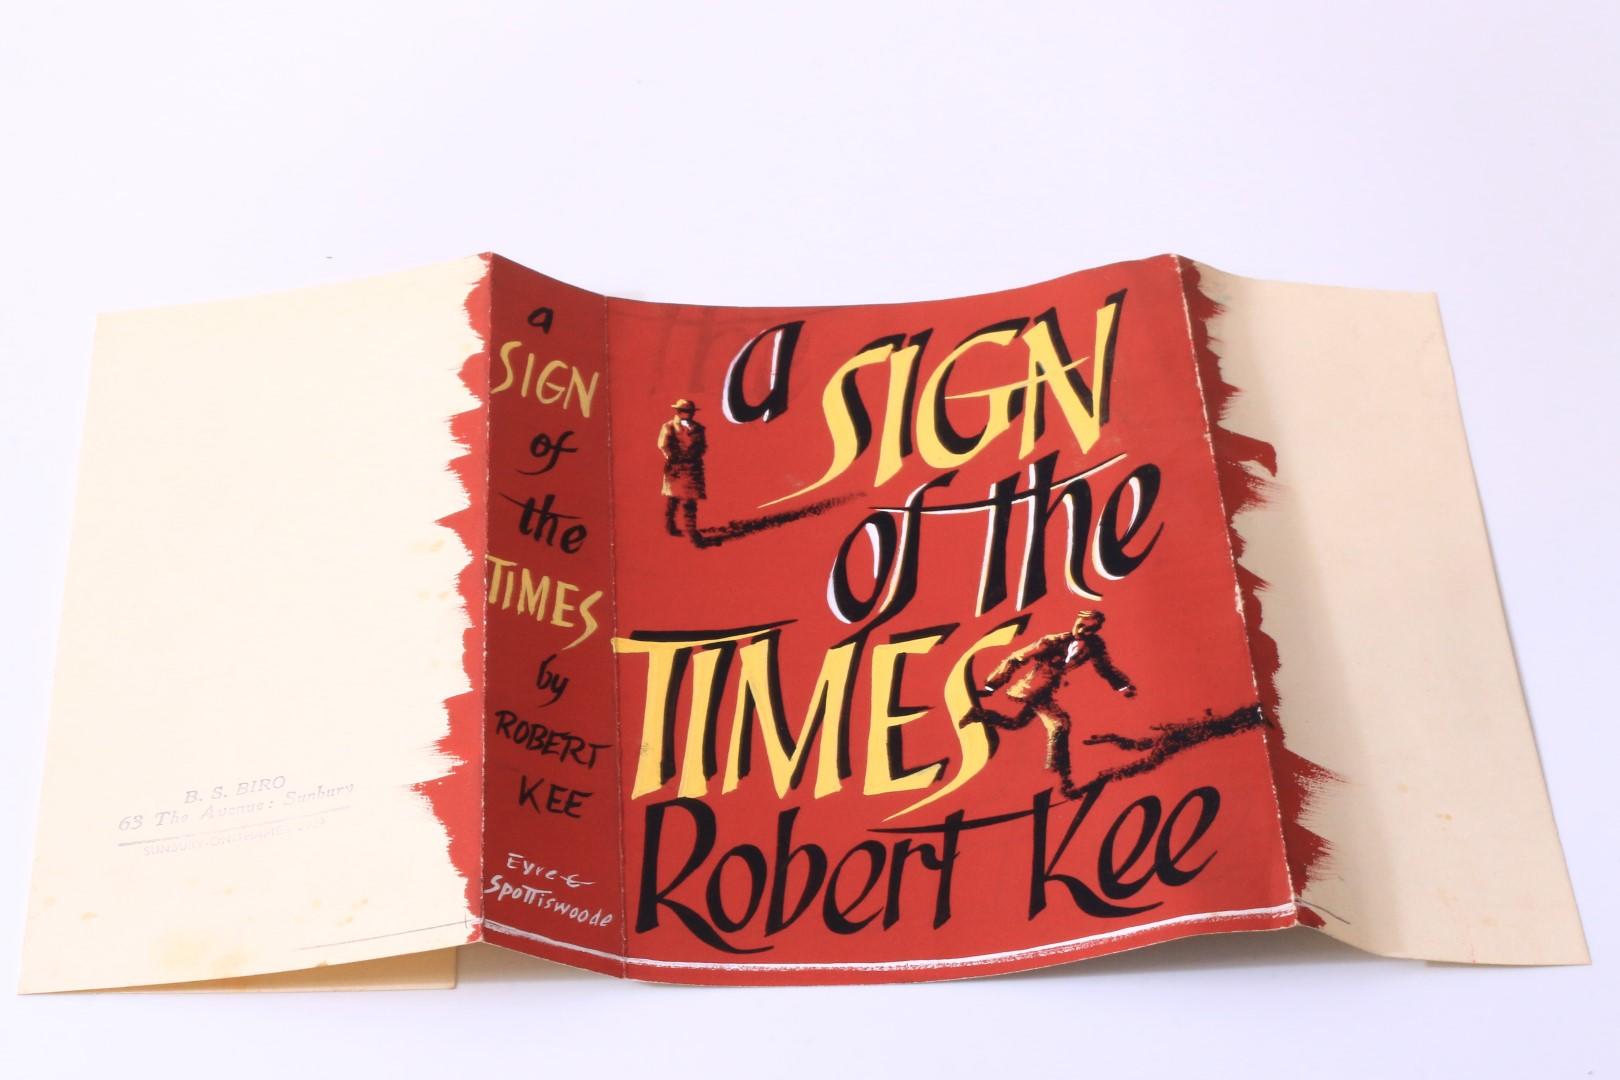 Robert Kee - A Sign of the Times - Eyre & Spottiswoode, 1955, Proof.